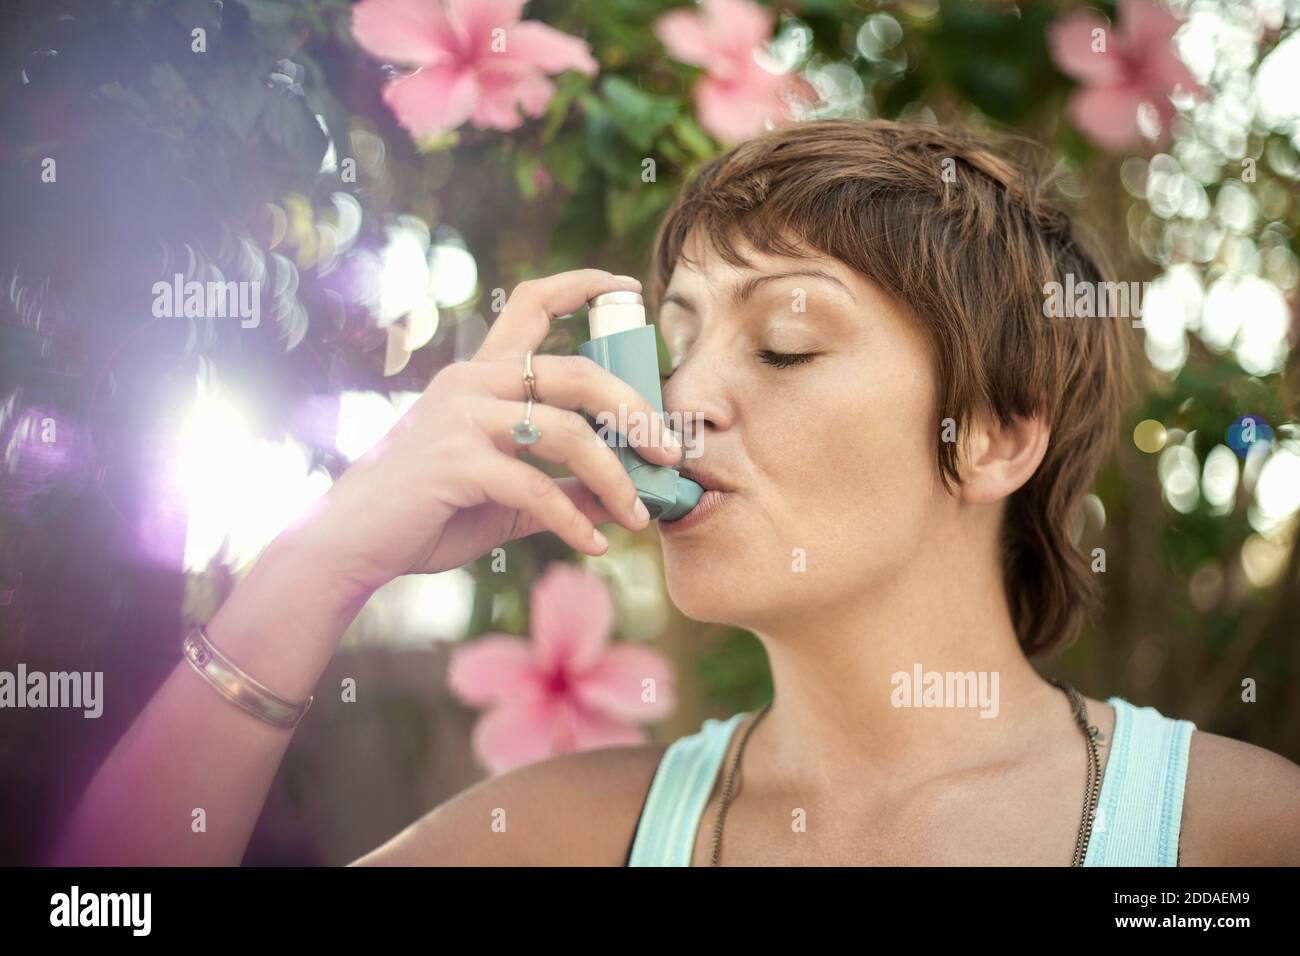 Young woman breathing through asthma inhaler Stock Photo